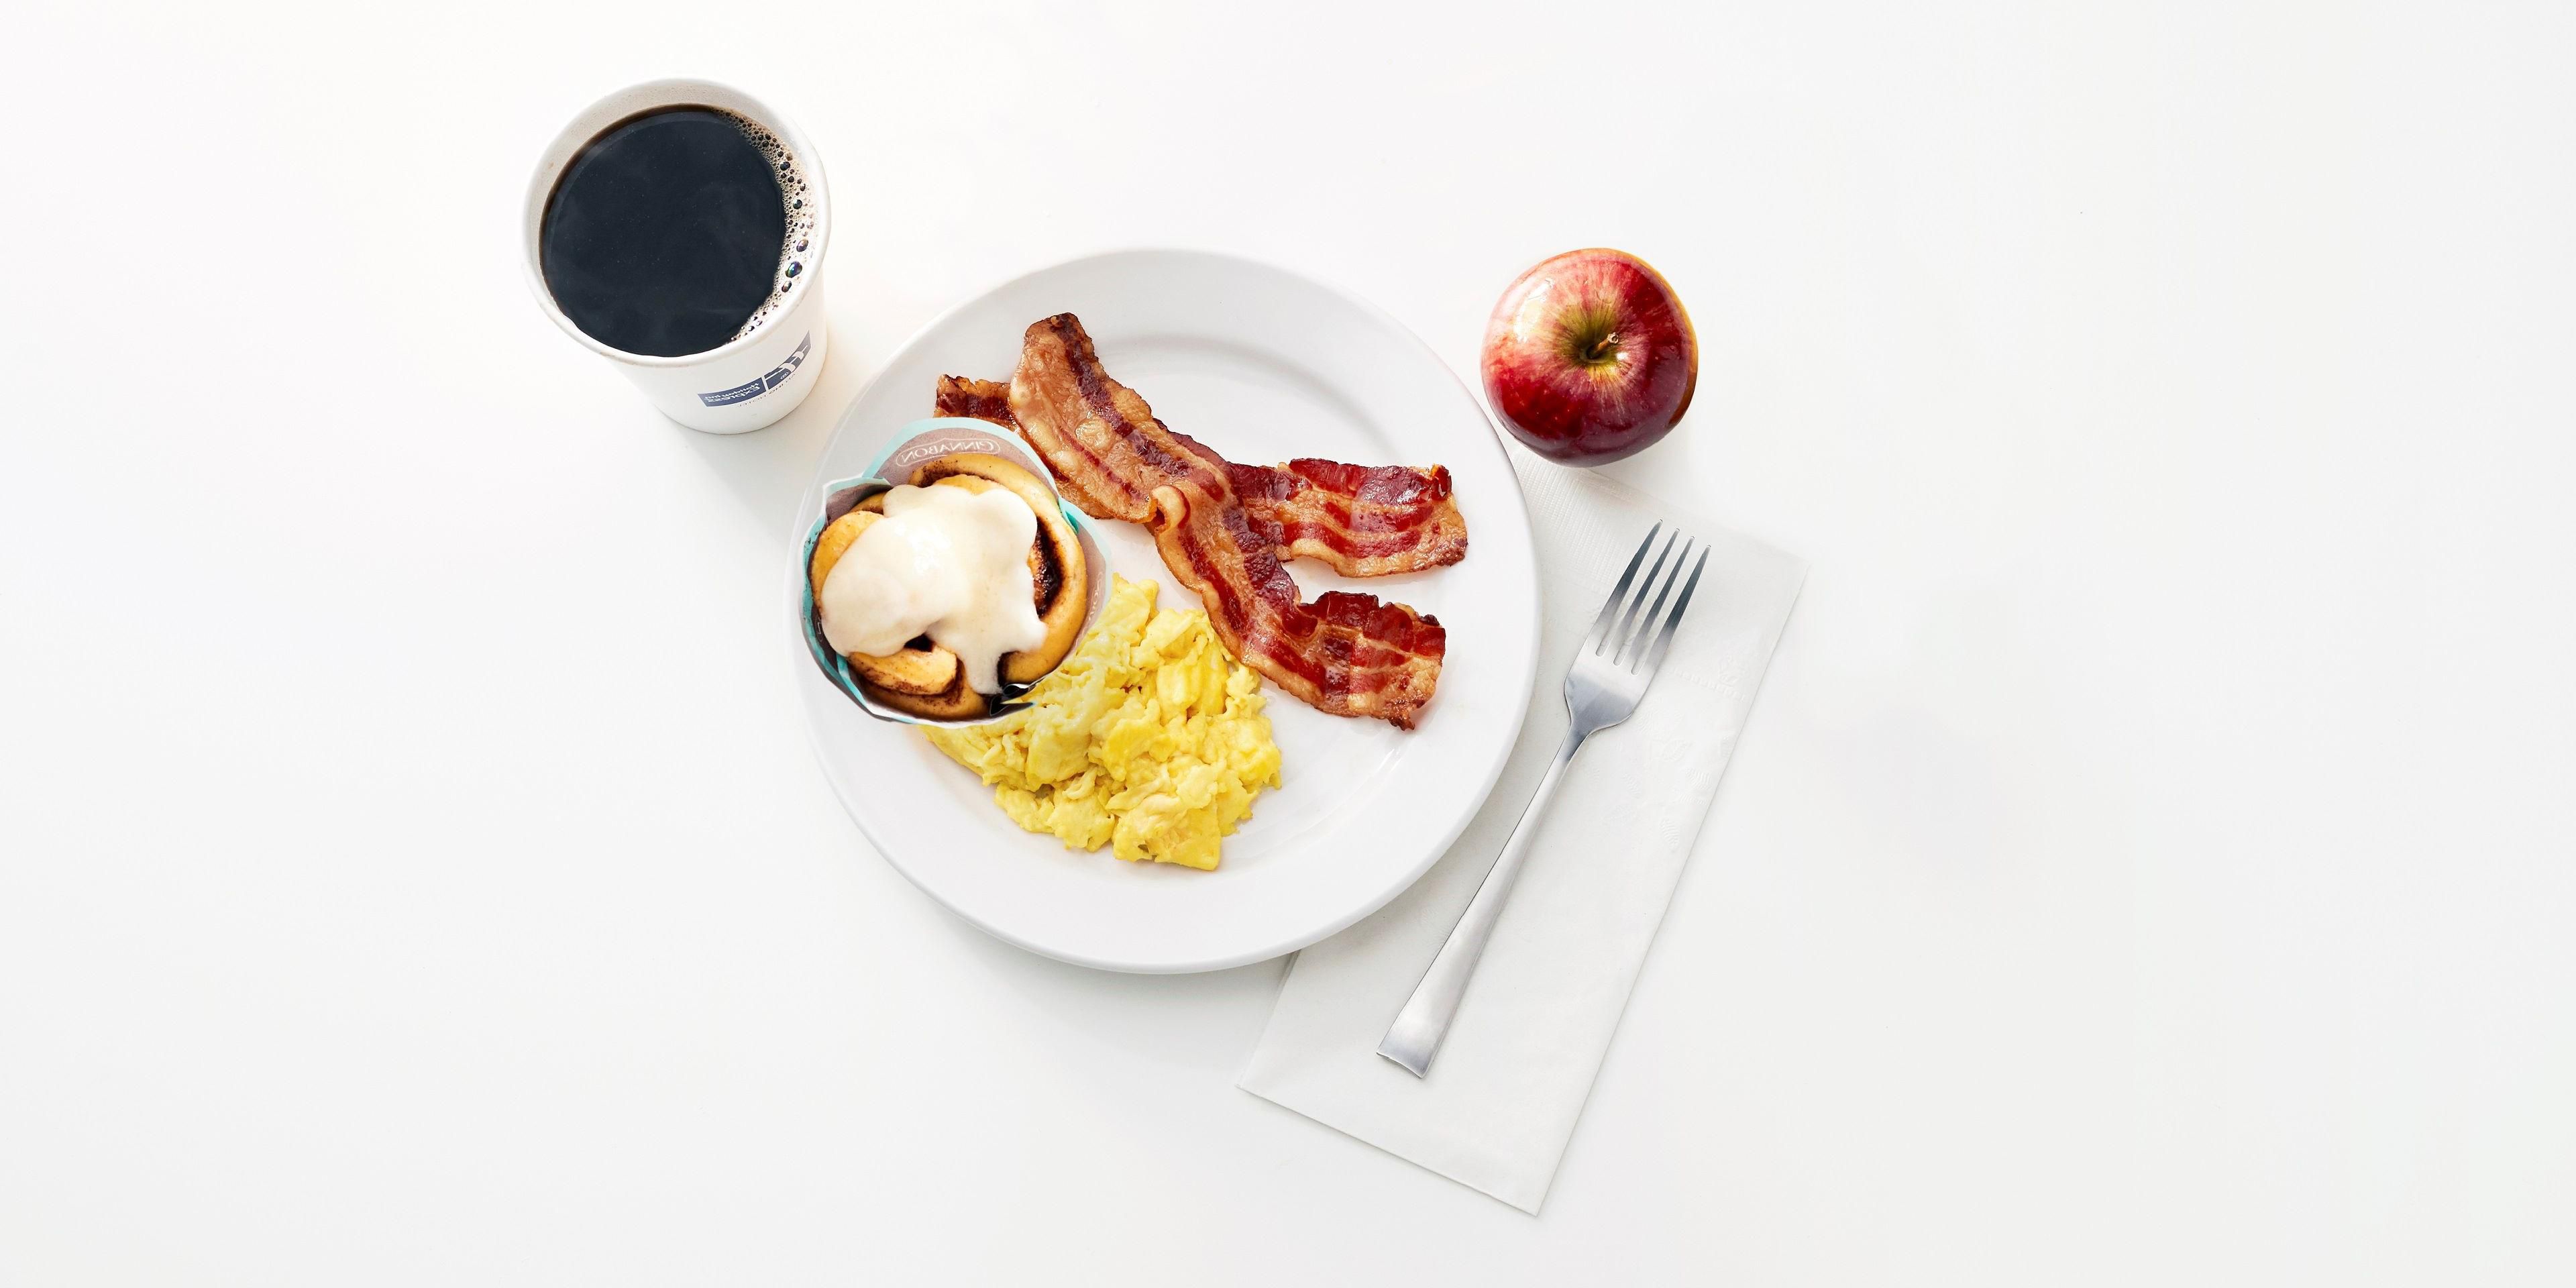 Kick start your day with our Express Start Breakfast, with grab ‘n’ go options and favorites such as eggs and bacon, hot pancakes, our signature cinnamon rolls and fresh coffee. Offered from 6AM-9AM.